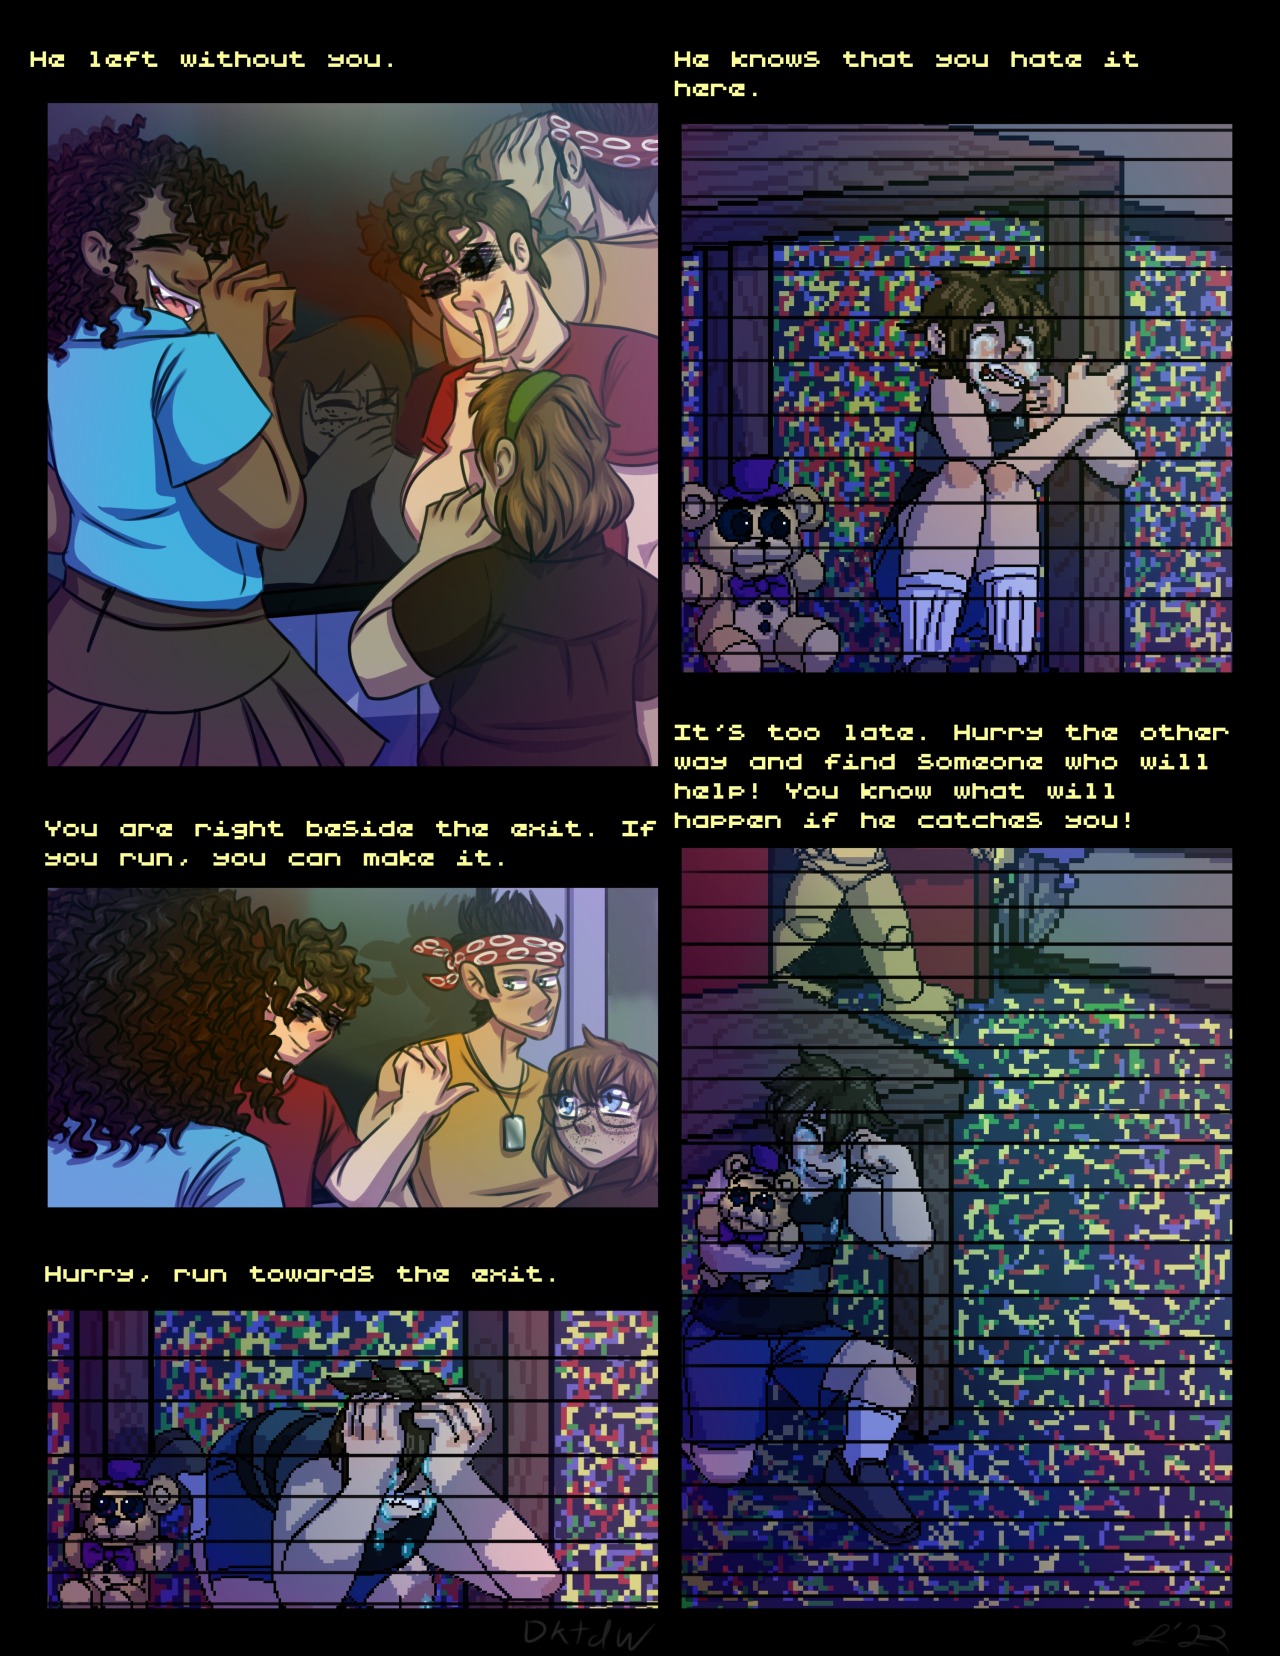 Blueycapsules fanmade comic I found on tumbler (right after what